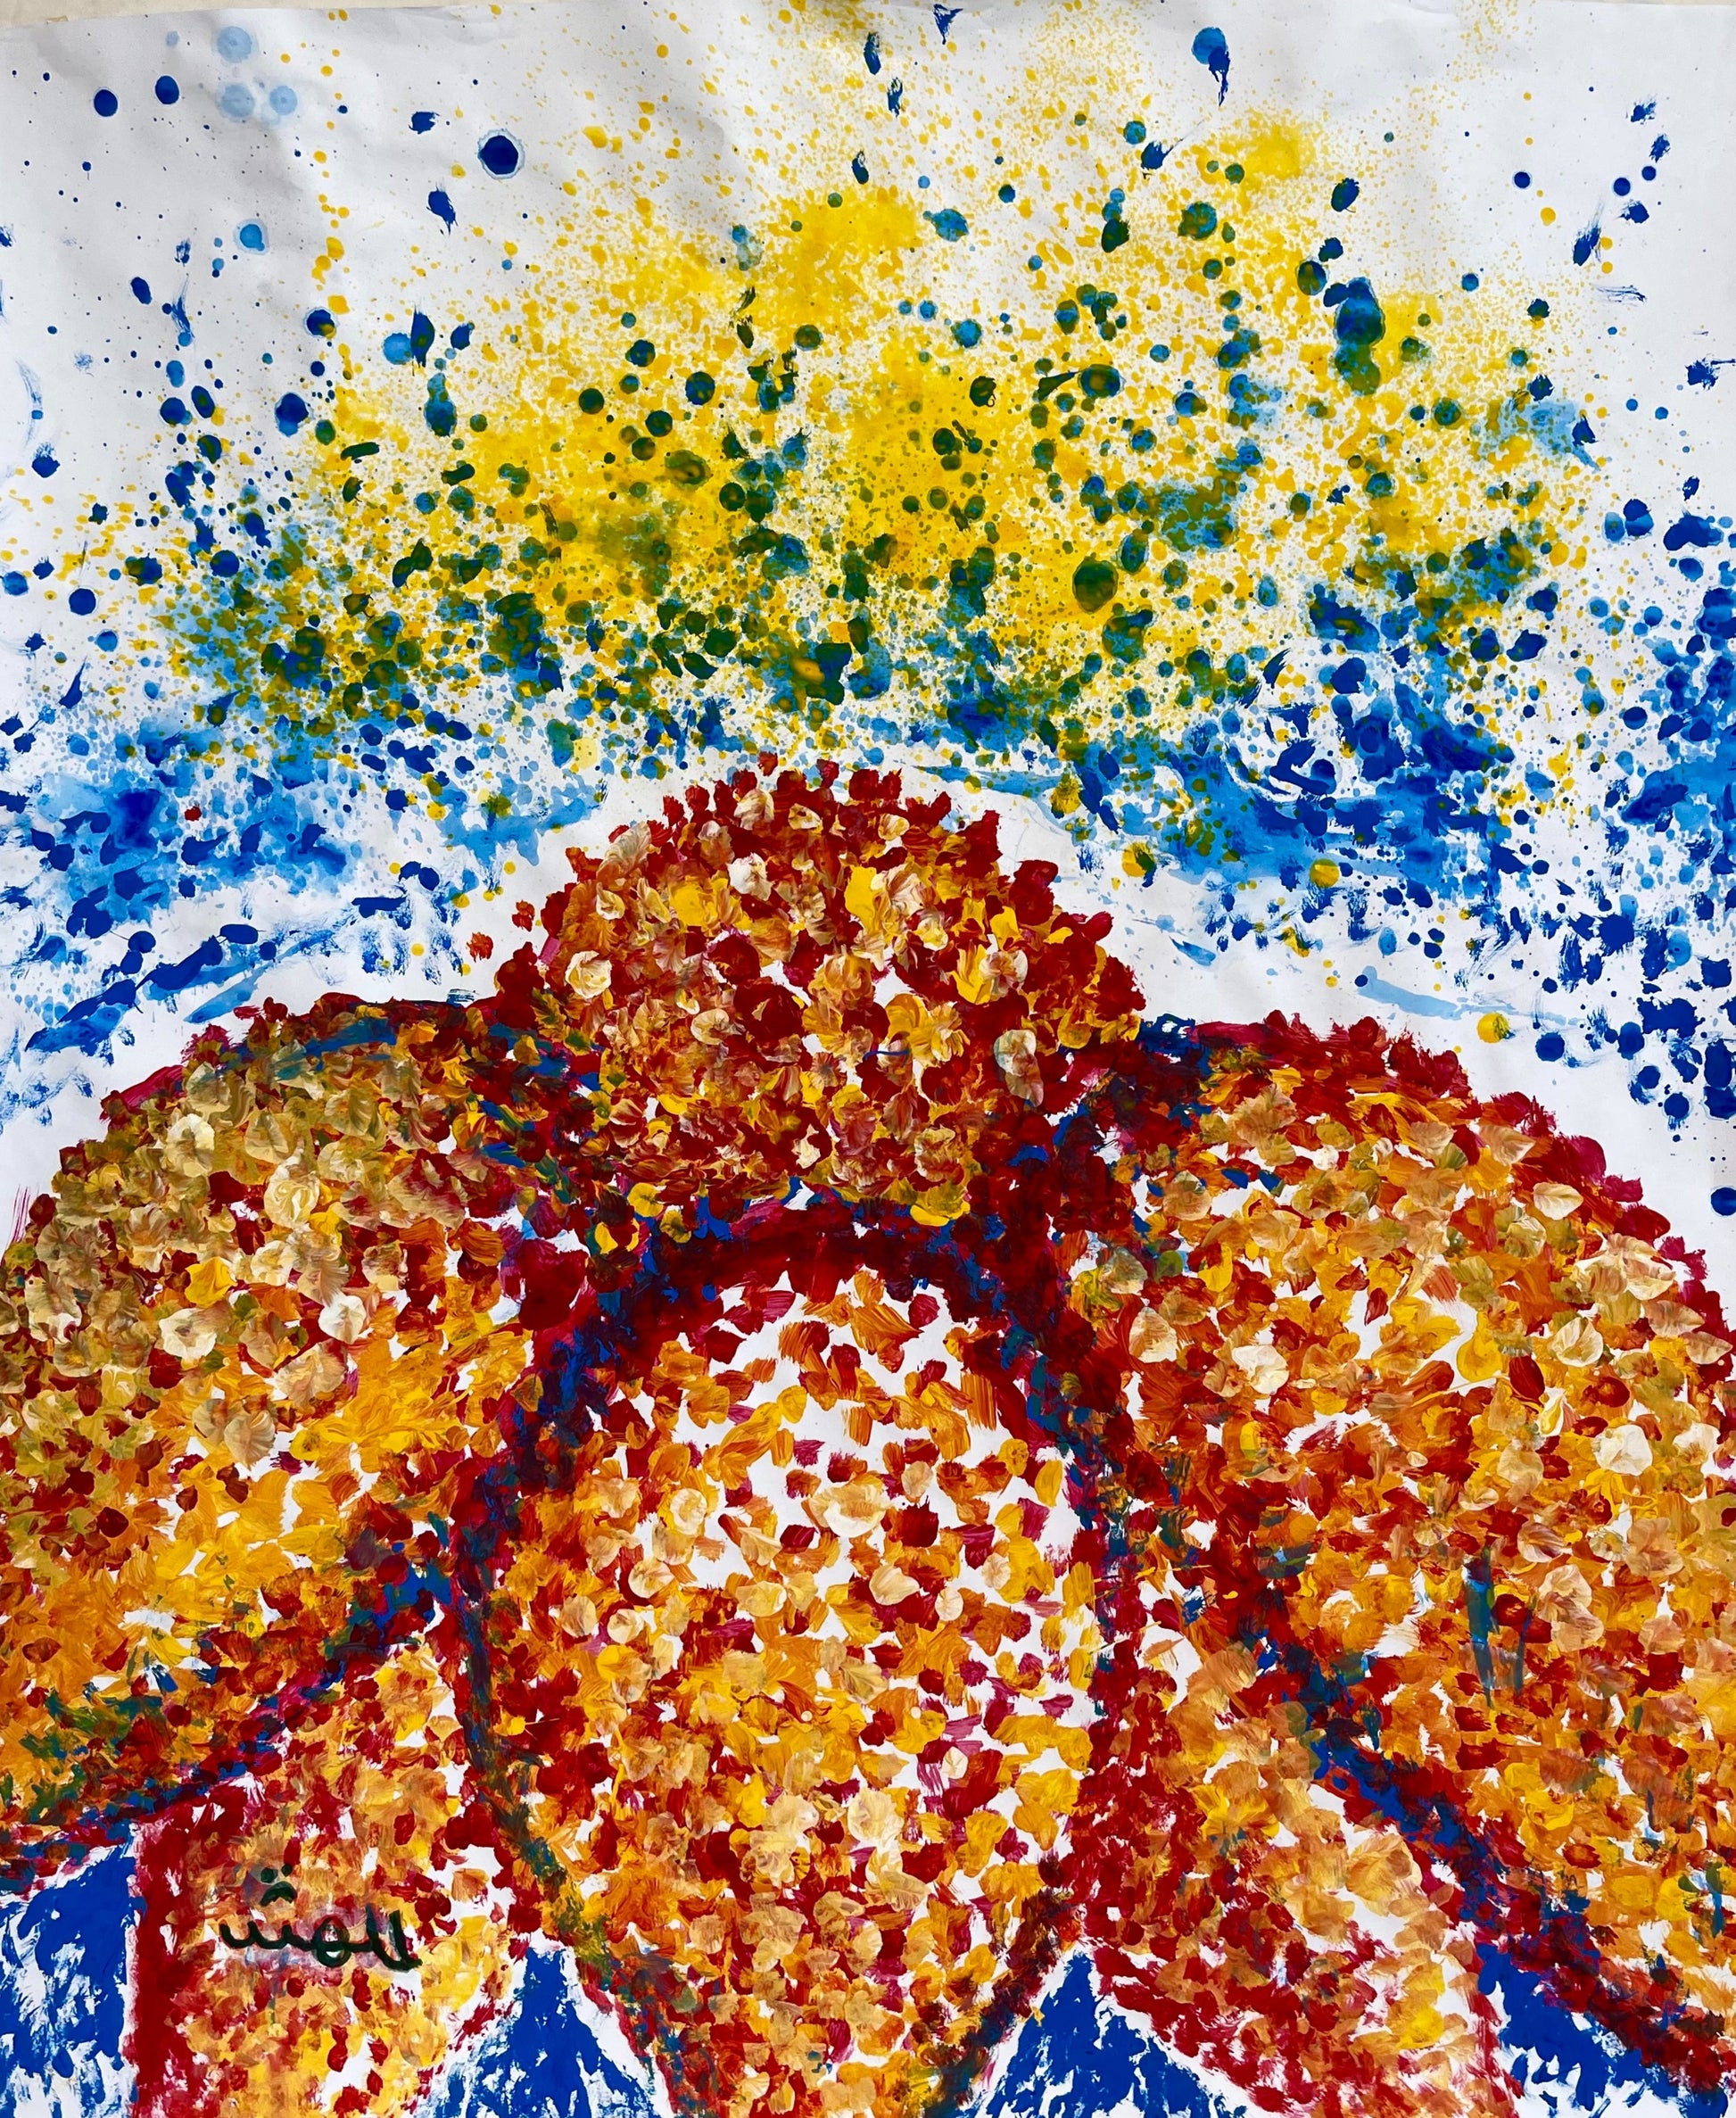 Star Dust- Sonarta.com,Amazing sign of summer and sunshine in the garden  Star Dust is an Acrylic on Paper by Shahla Rahimi Reynolds.  This Painting is 36" H x 31" W.